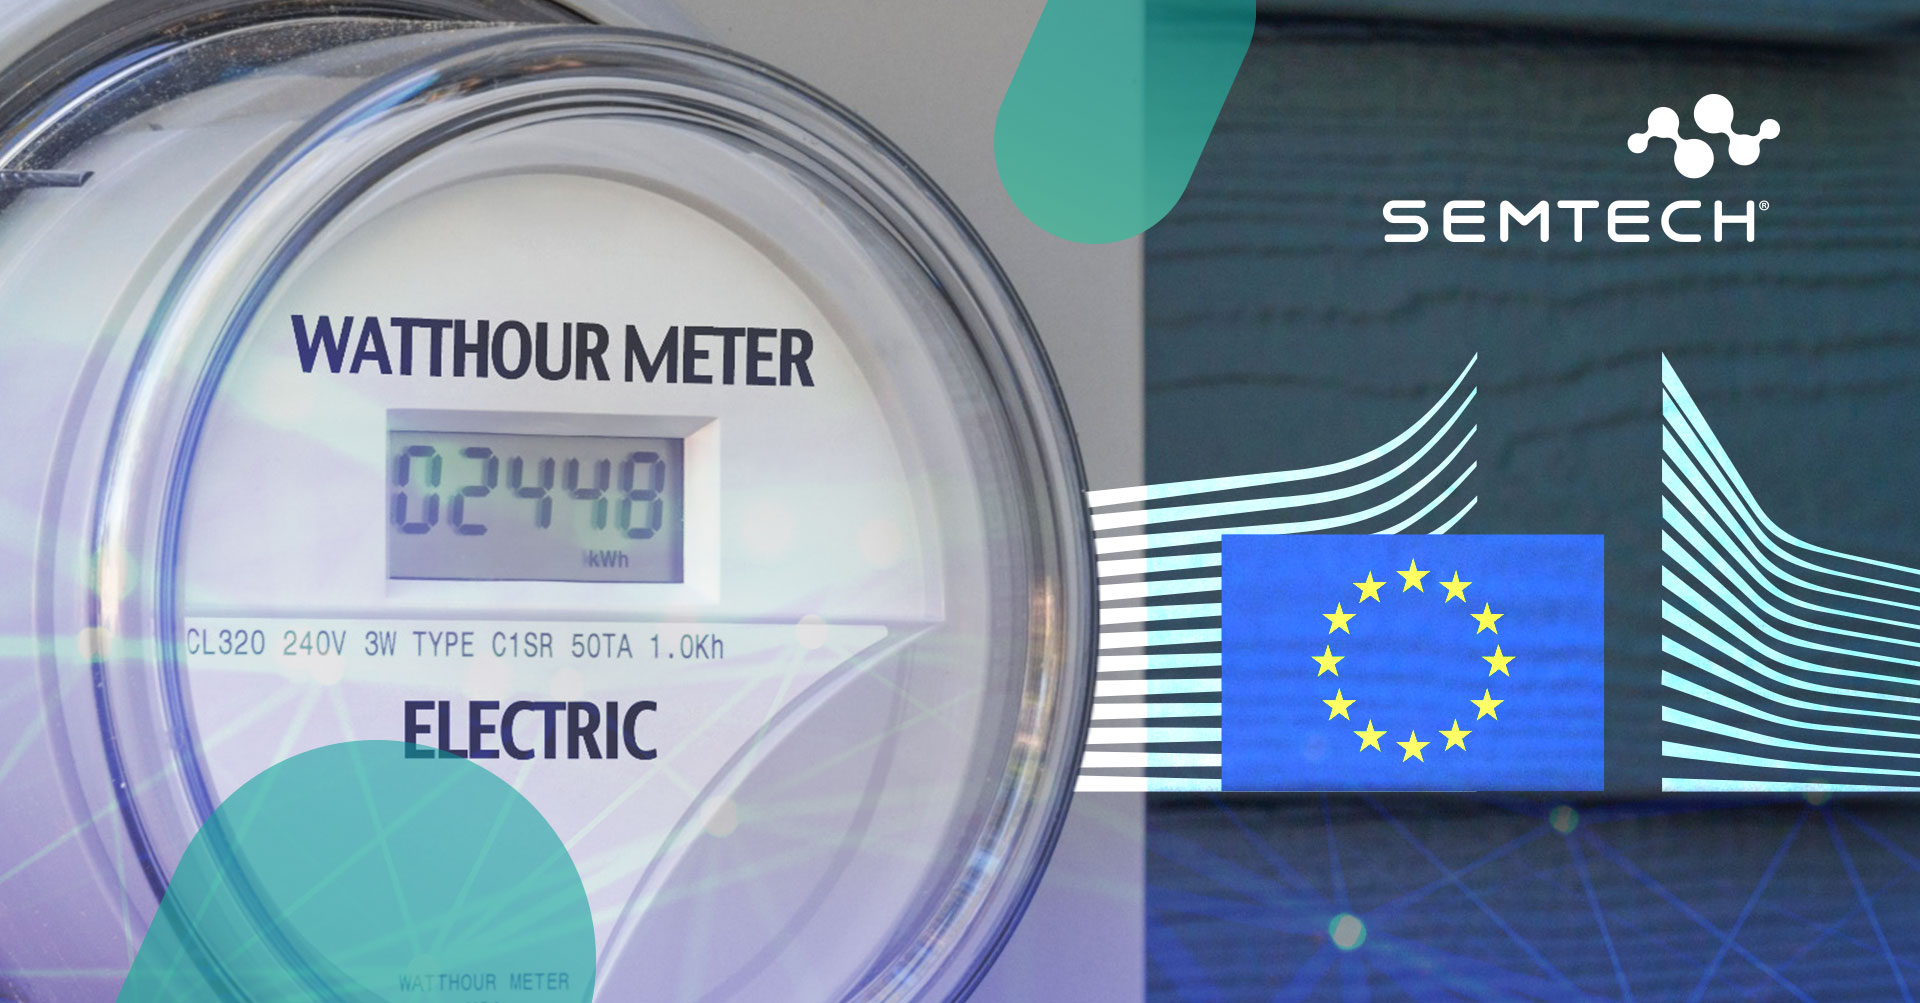 Interoperability of Smart Metering Data With Use of Standards in European Union